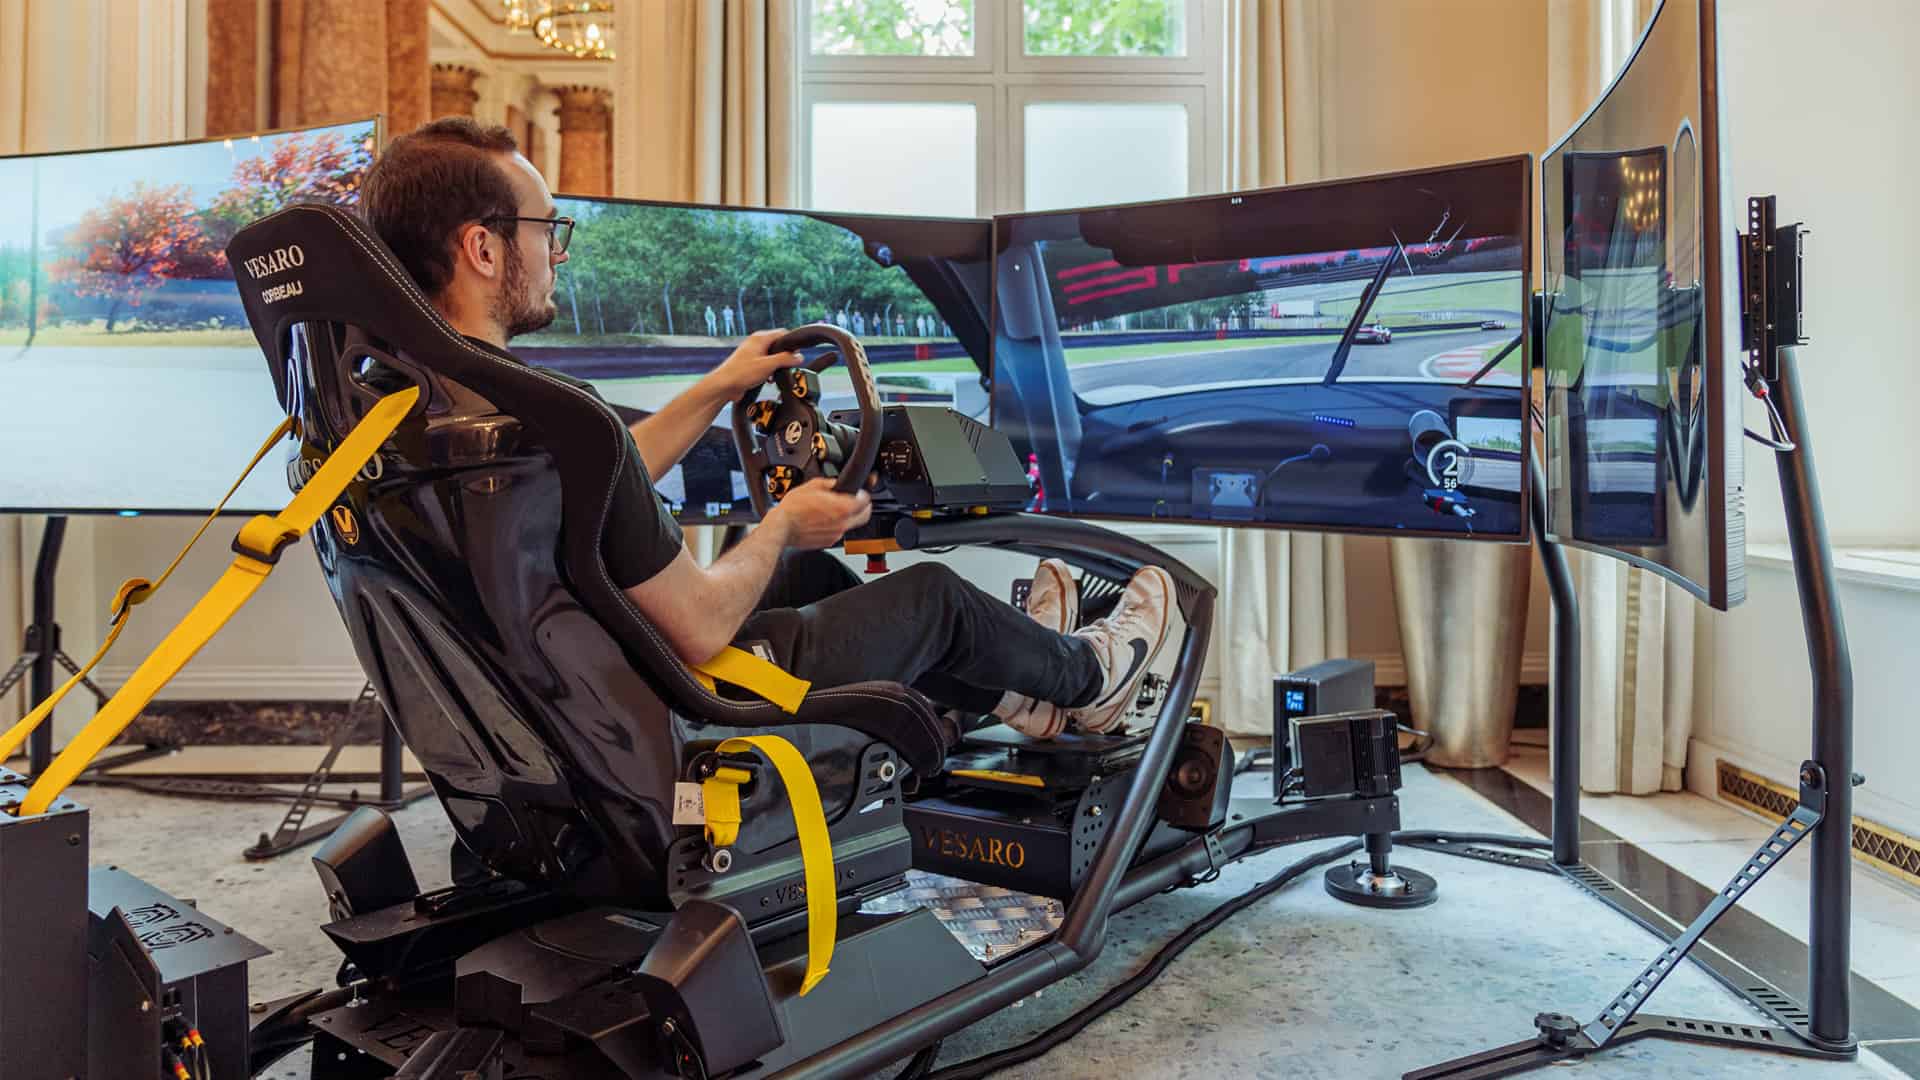 Official F1 sim experience centres will use D-Box haptic-equipped Vesaro cockpits